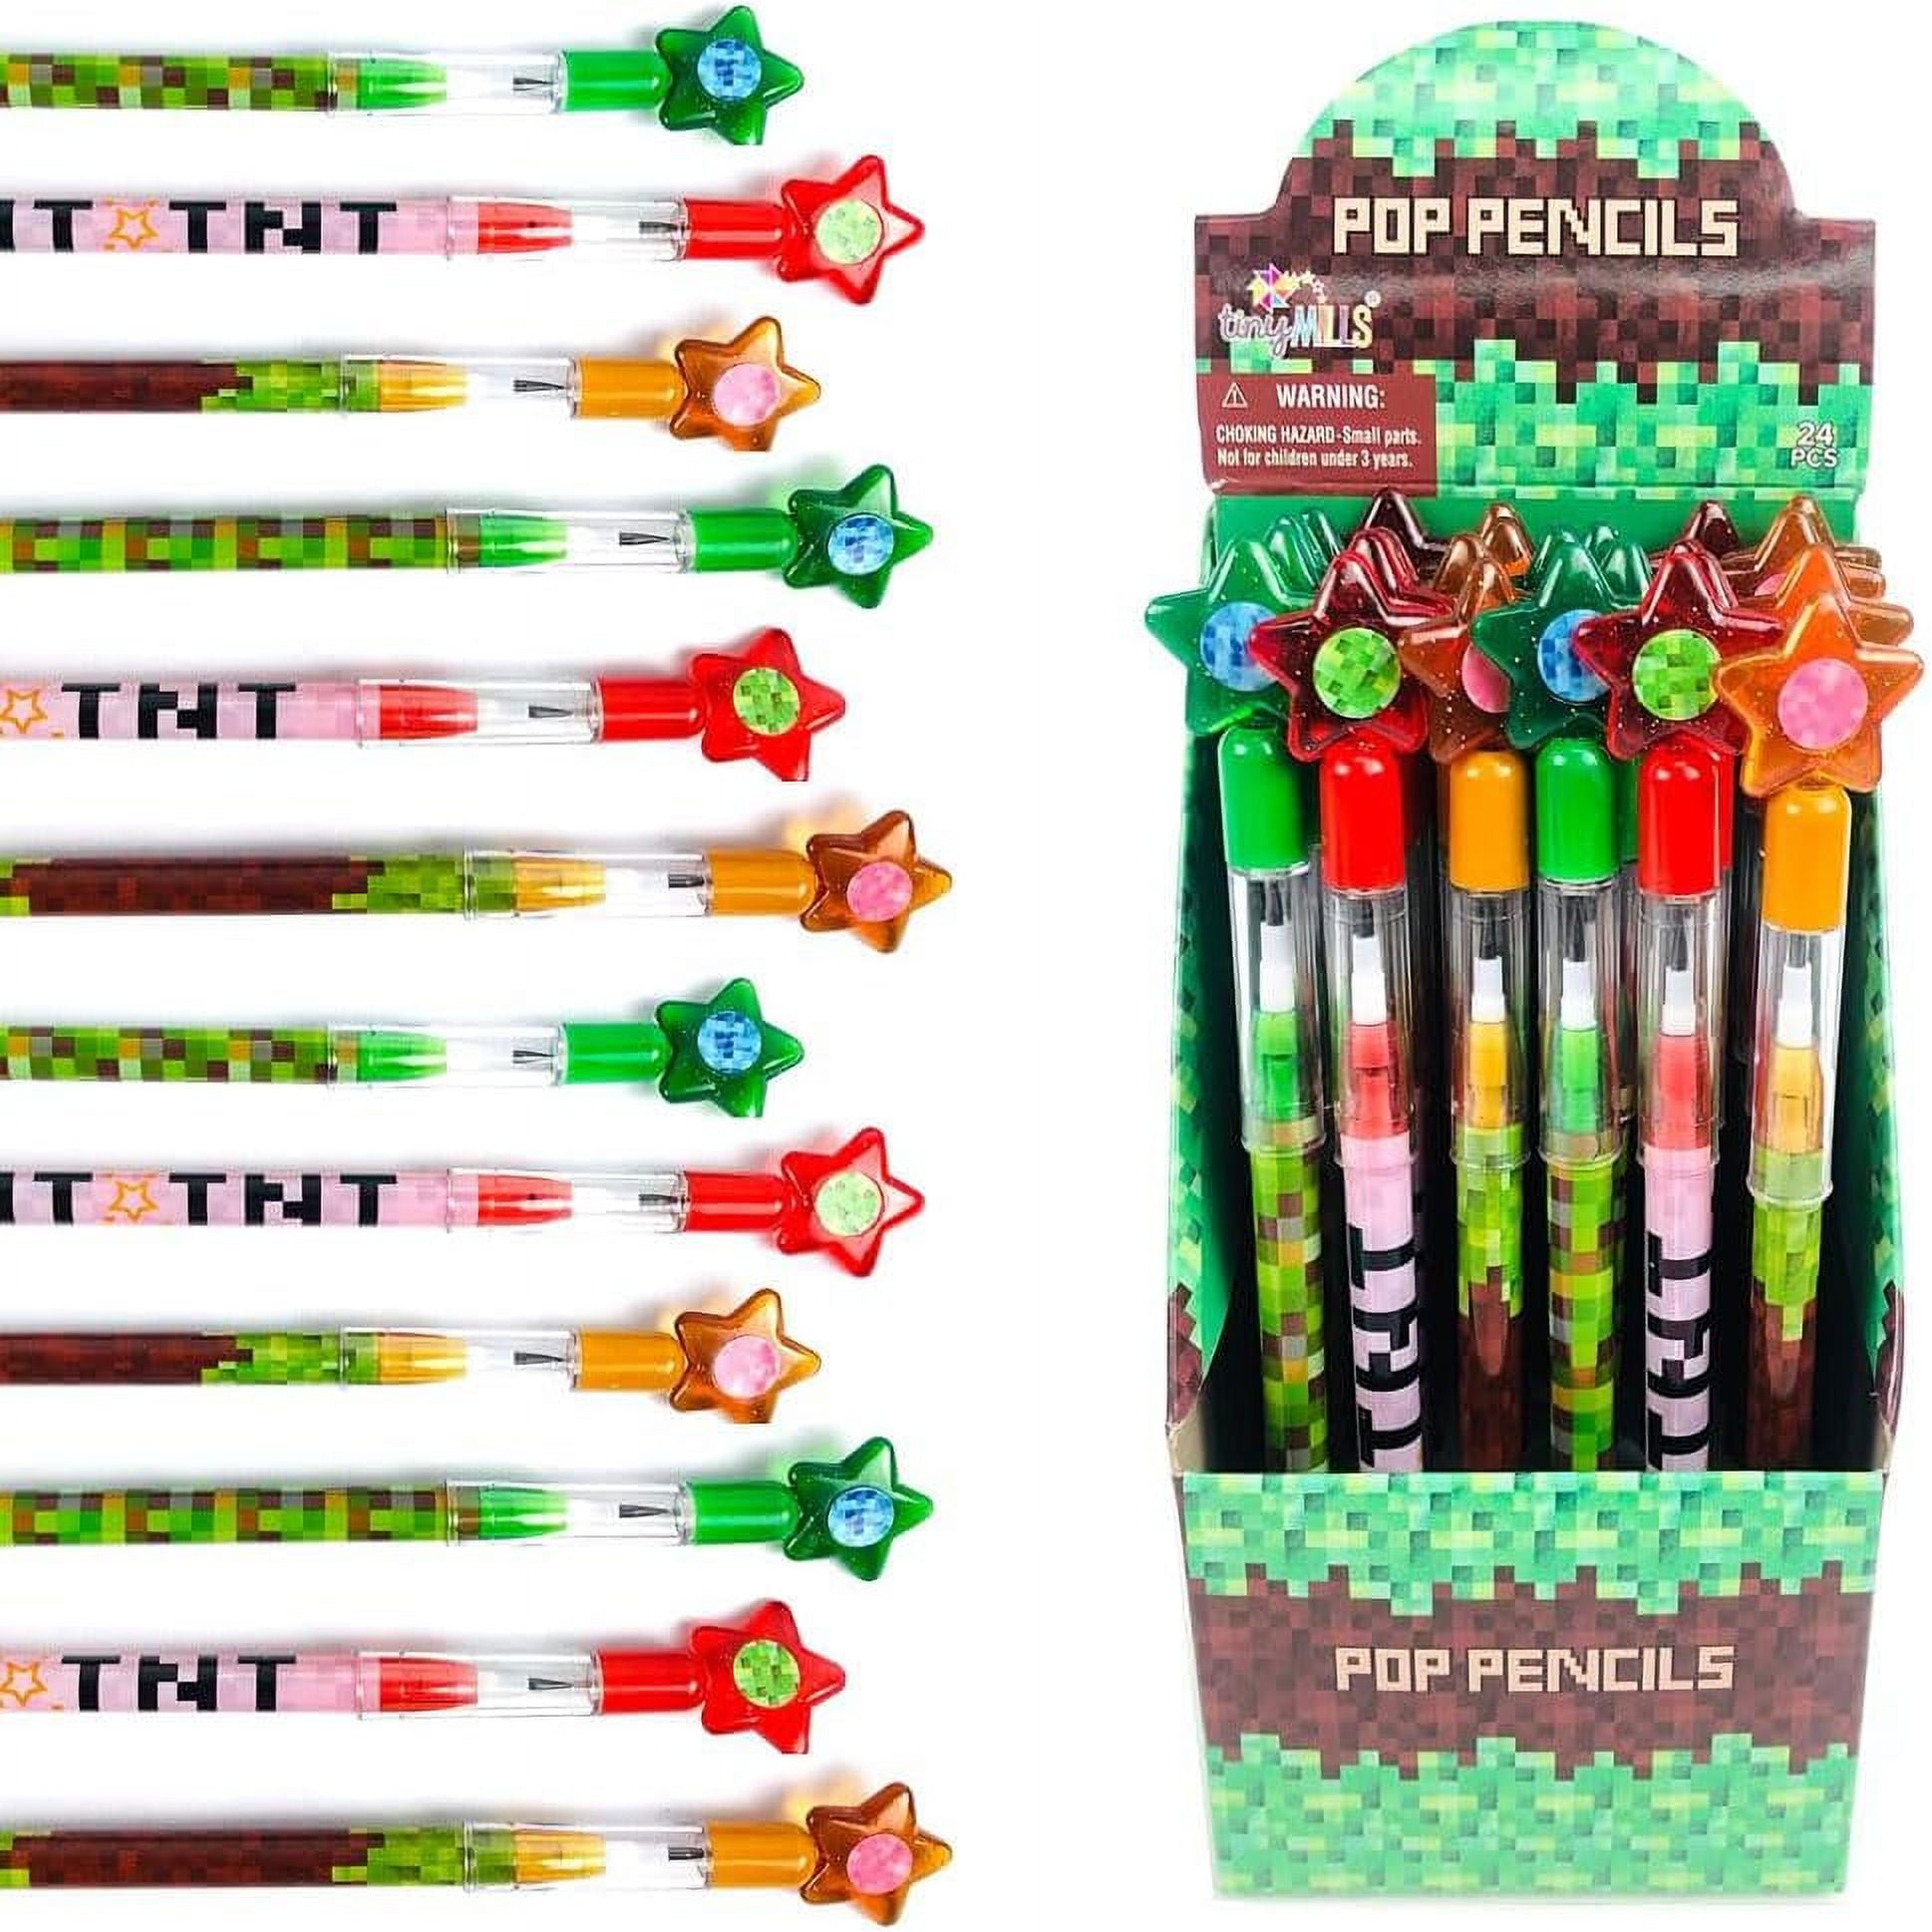 60 Pieces Christmas Stackable Pencils Christmas Multi Point